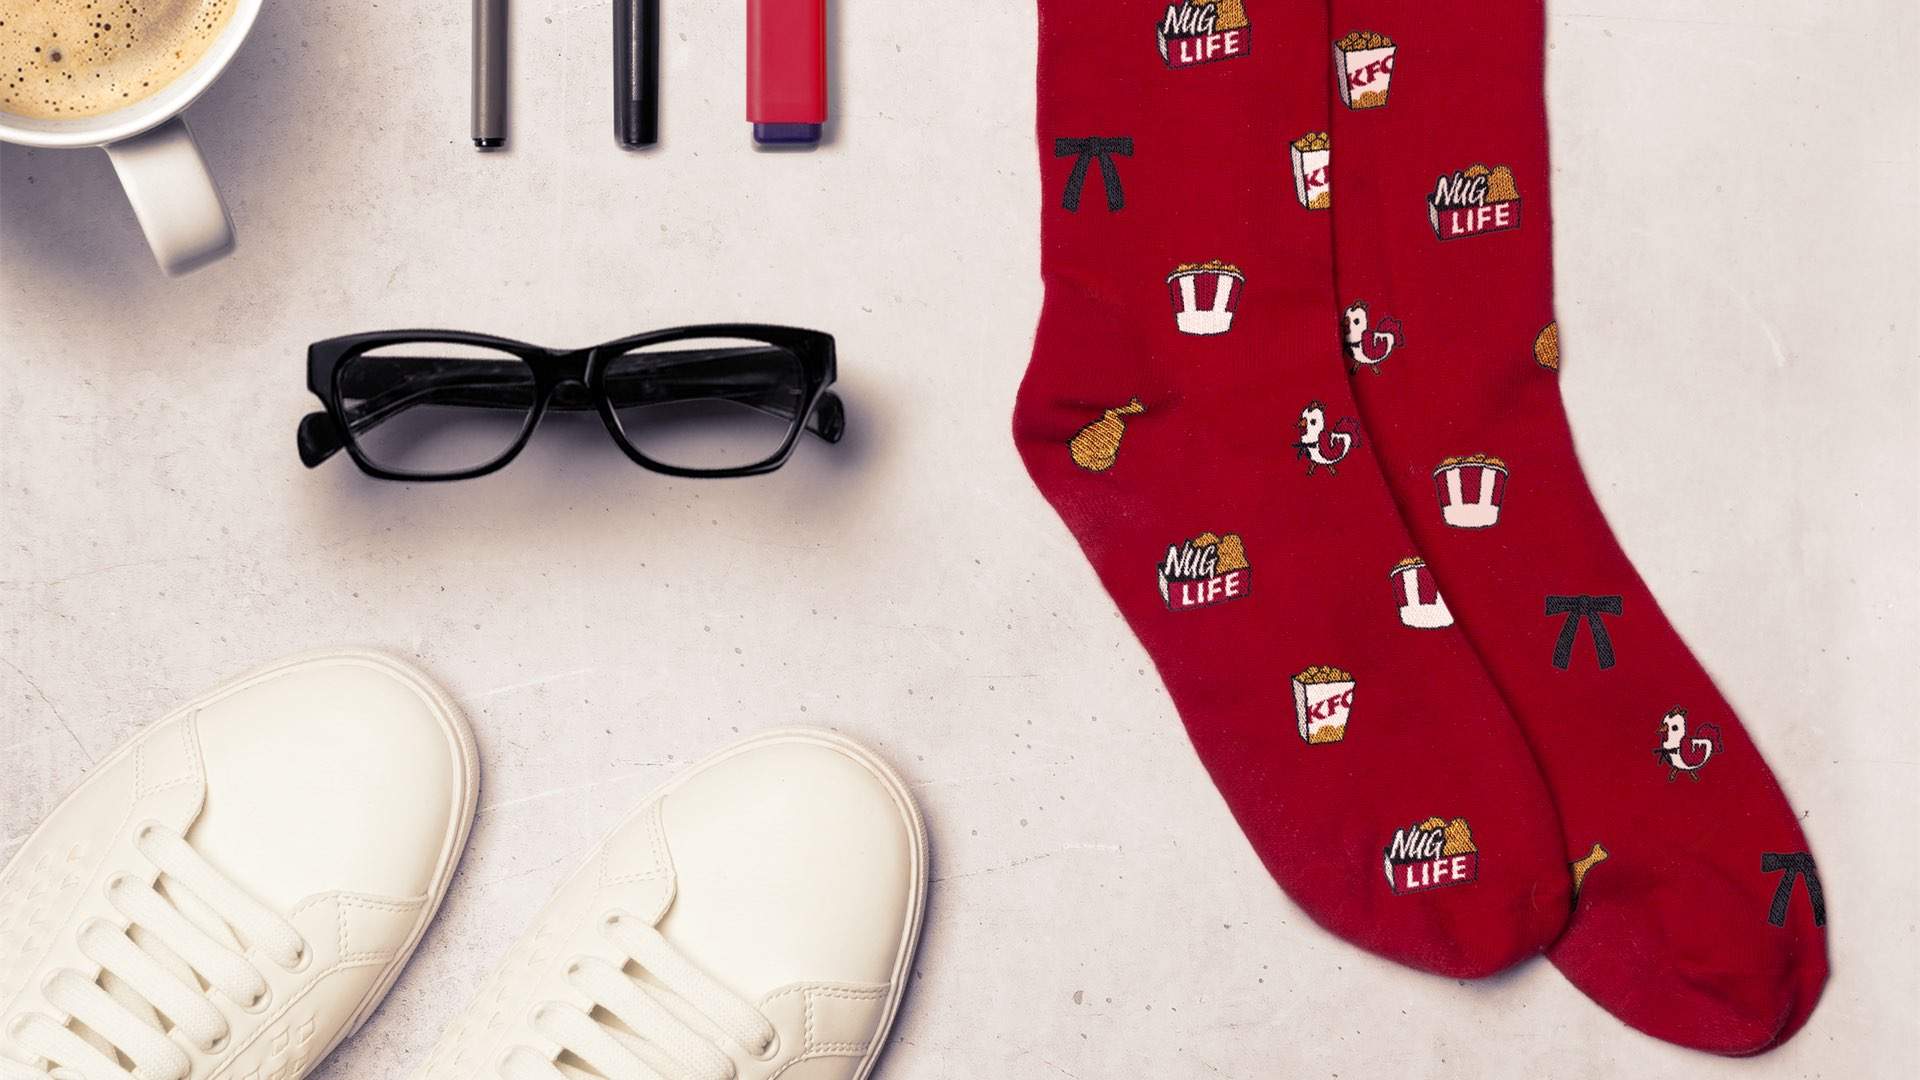 KFC Is About to Drop a Super-Aussie Collection of Merch